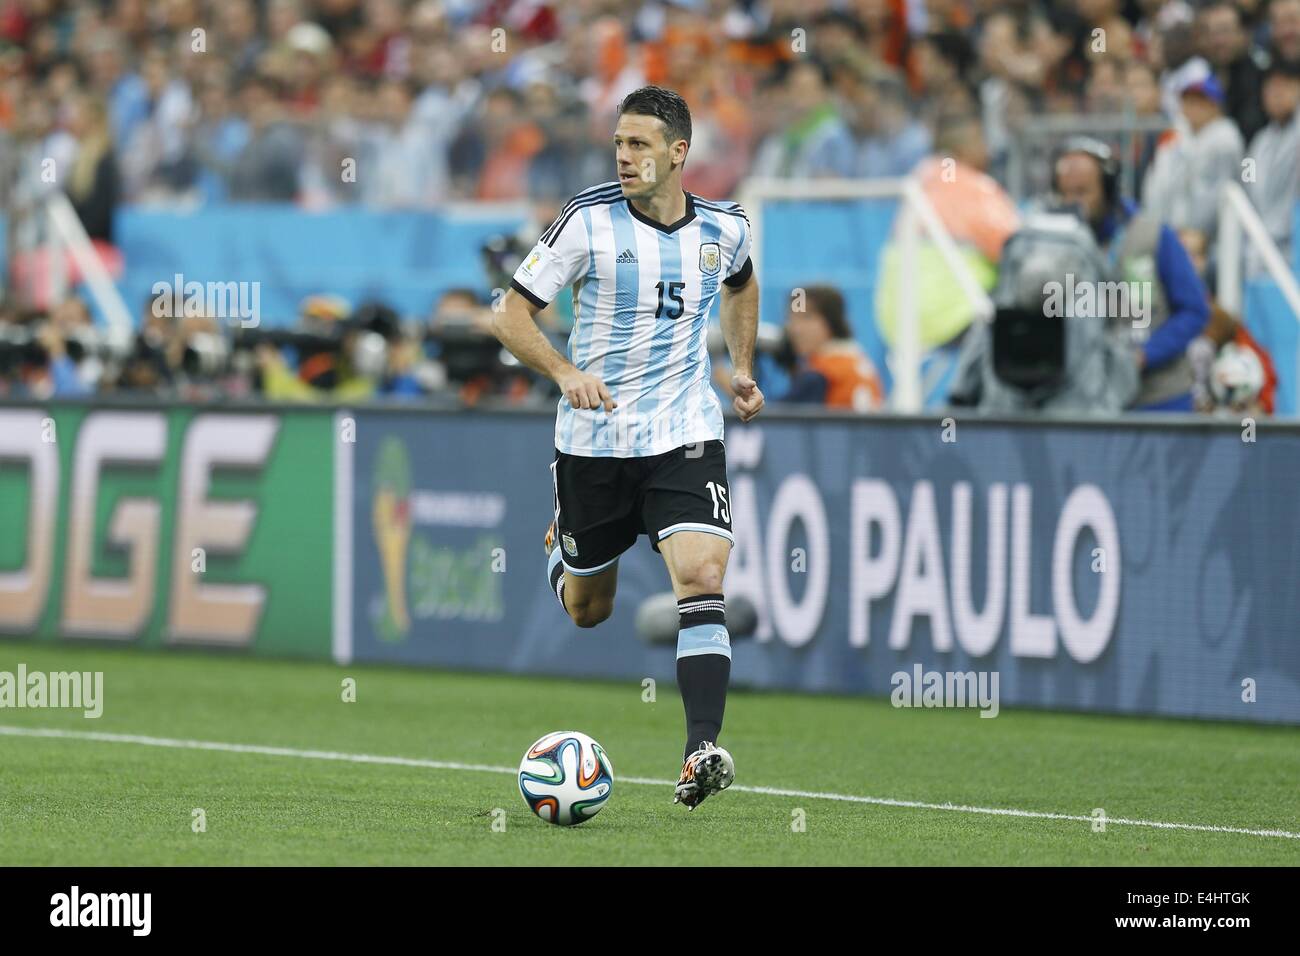 Martin Demichelis (ARG), JULY 9, 2014 - Football / Soccer : FIFA World Cup 2014 semi-final match between Netherlands 0(2-4)0 Argentina at Arena De Sao Paulo Stadium in Sao Paulo, Brazil. (Photo by AFLO) [3604] Stock Photo